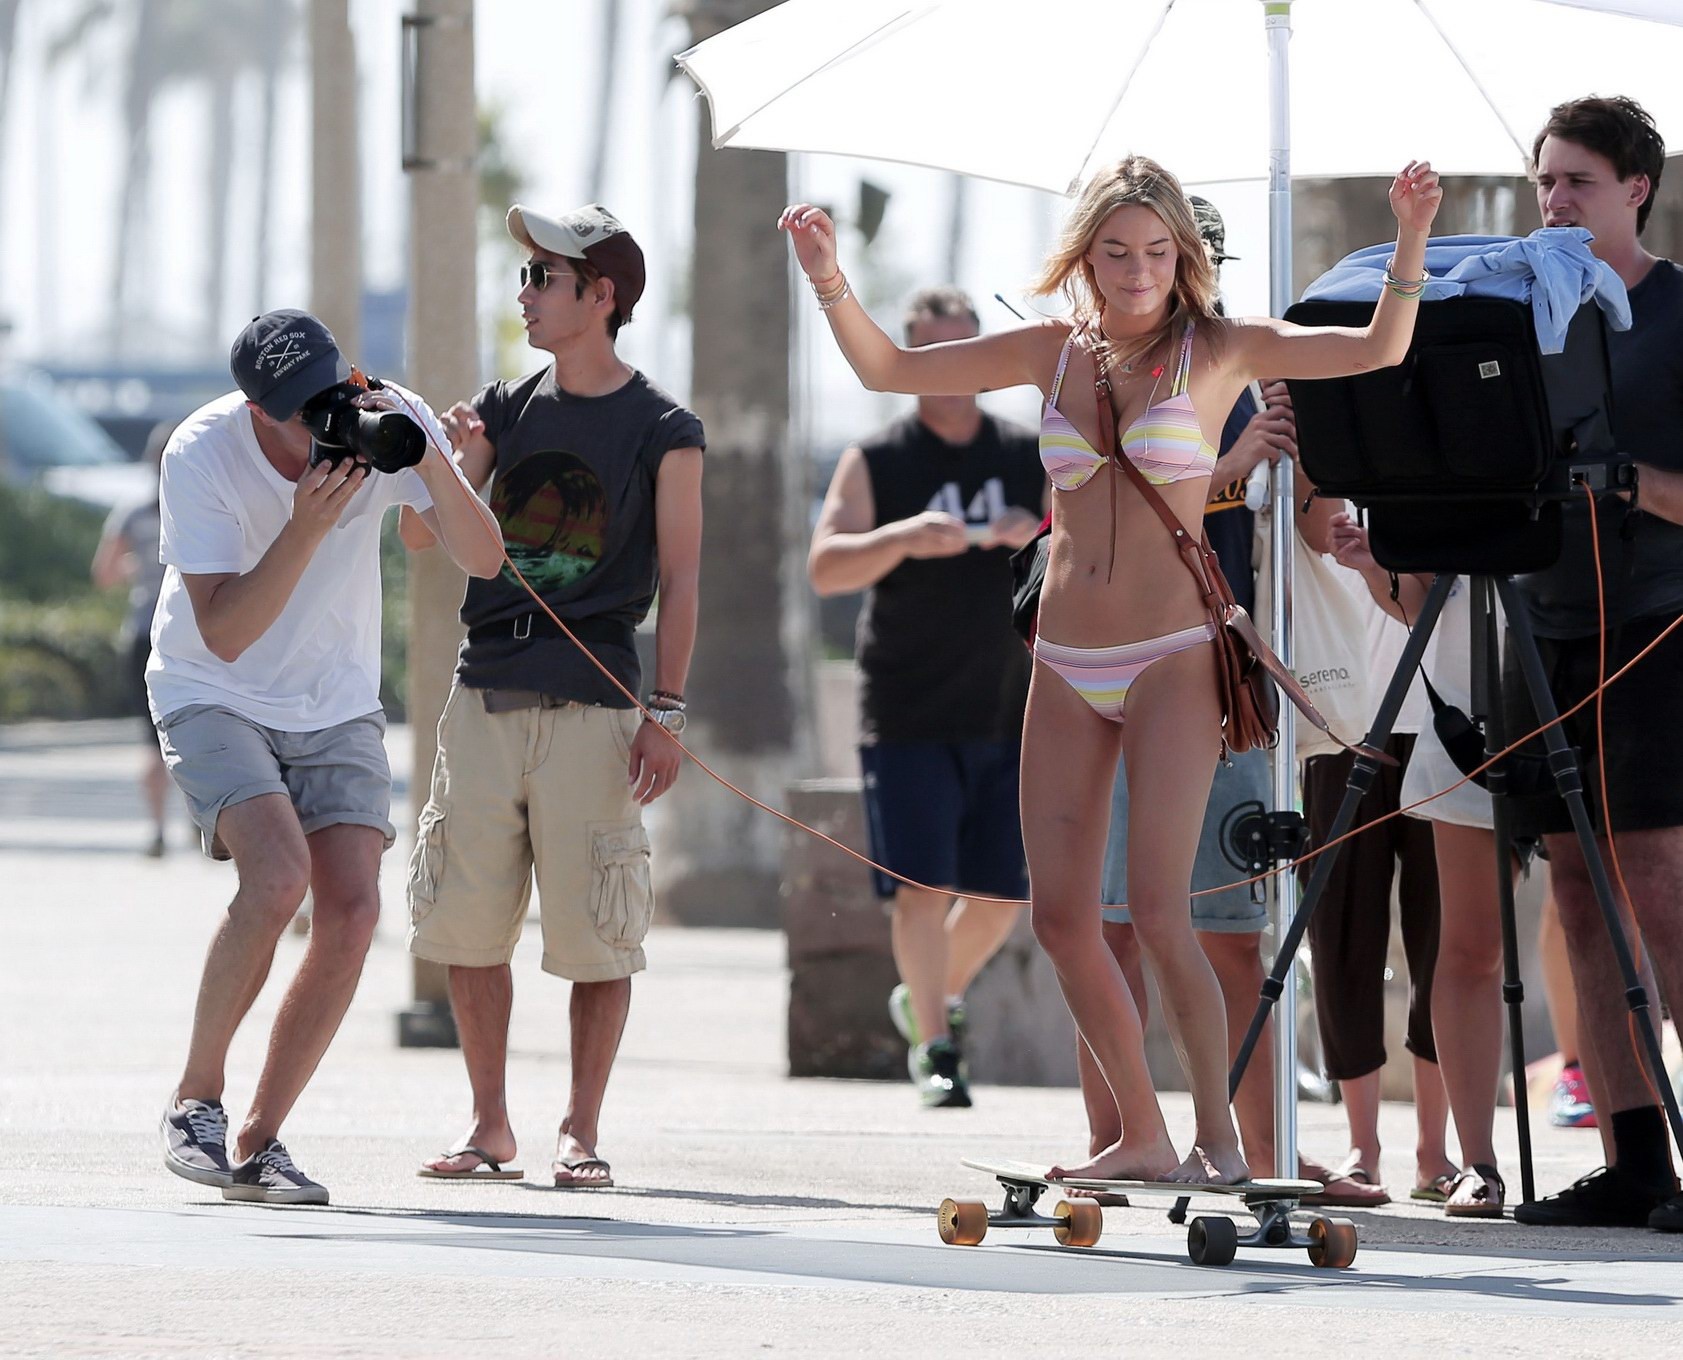 Camille Rowe showing off her ass at the bikini photoshoot in LA #75185172